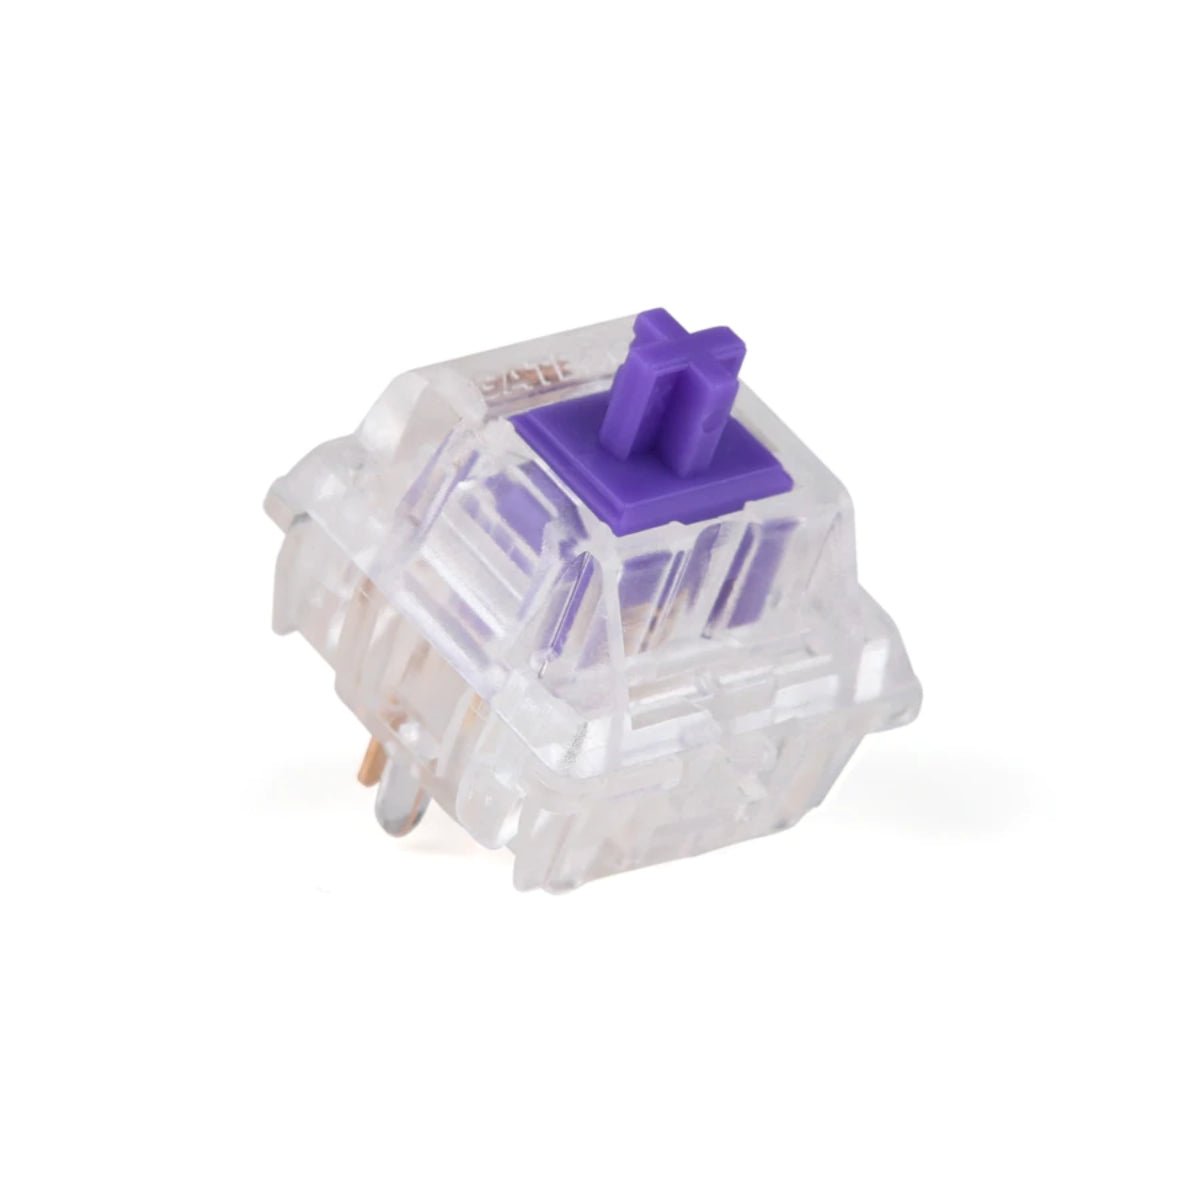 KBD Fans Zeal V2 Tactile Switches 65g - Zealios - Store 974 | ستور ٩٧٤